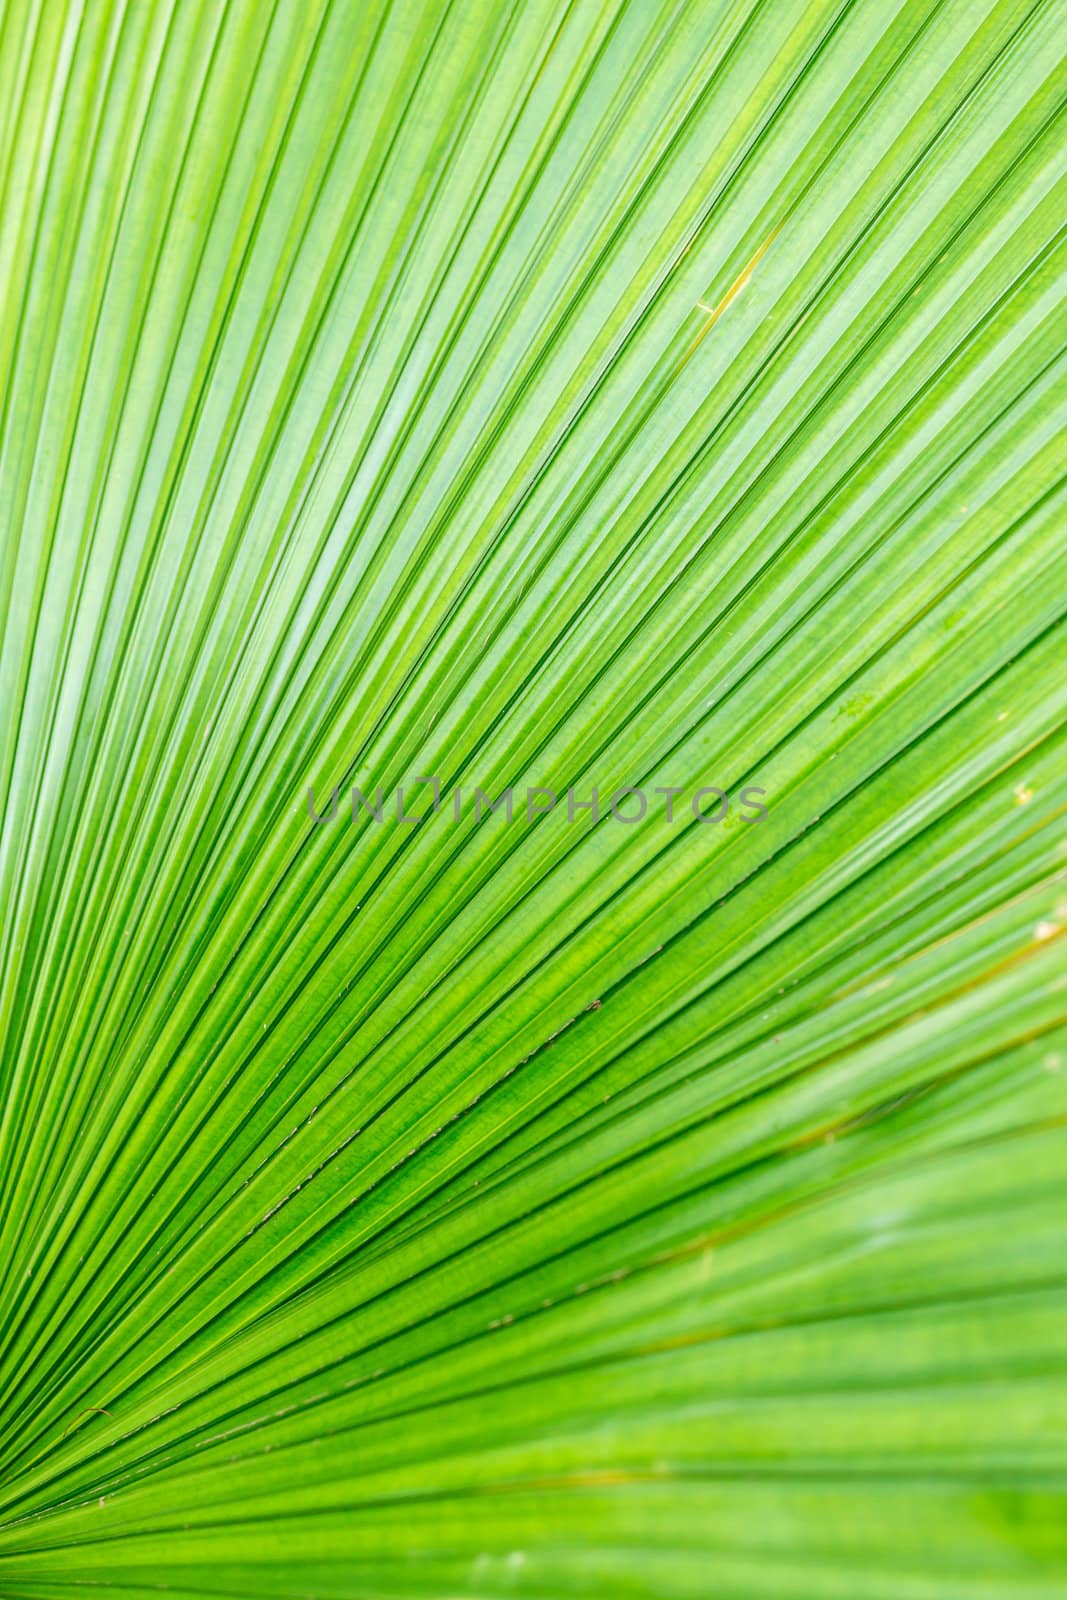 Green leaf of rainforest palm tree, close up as background texture.